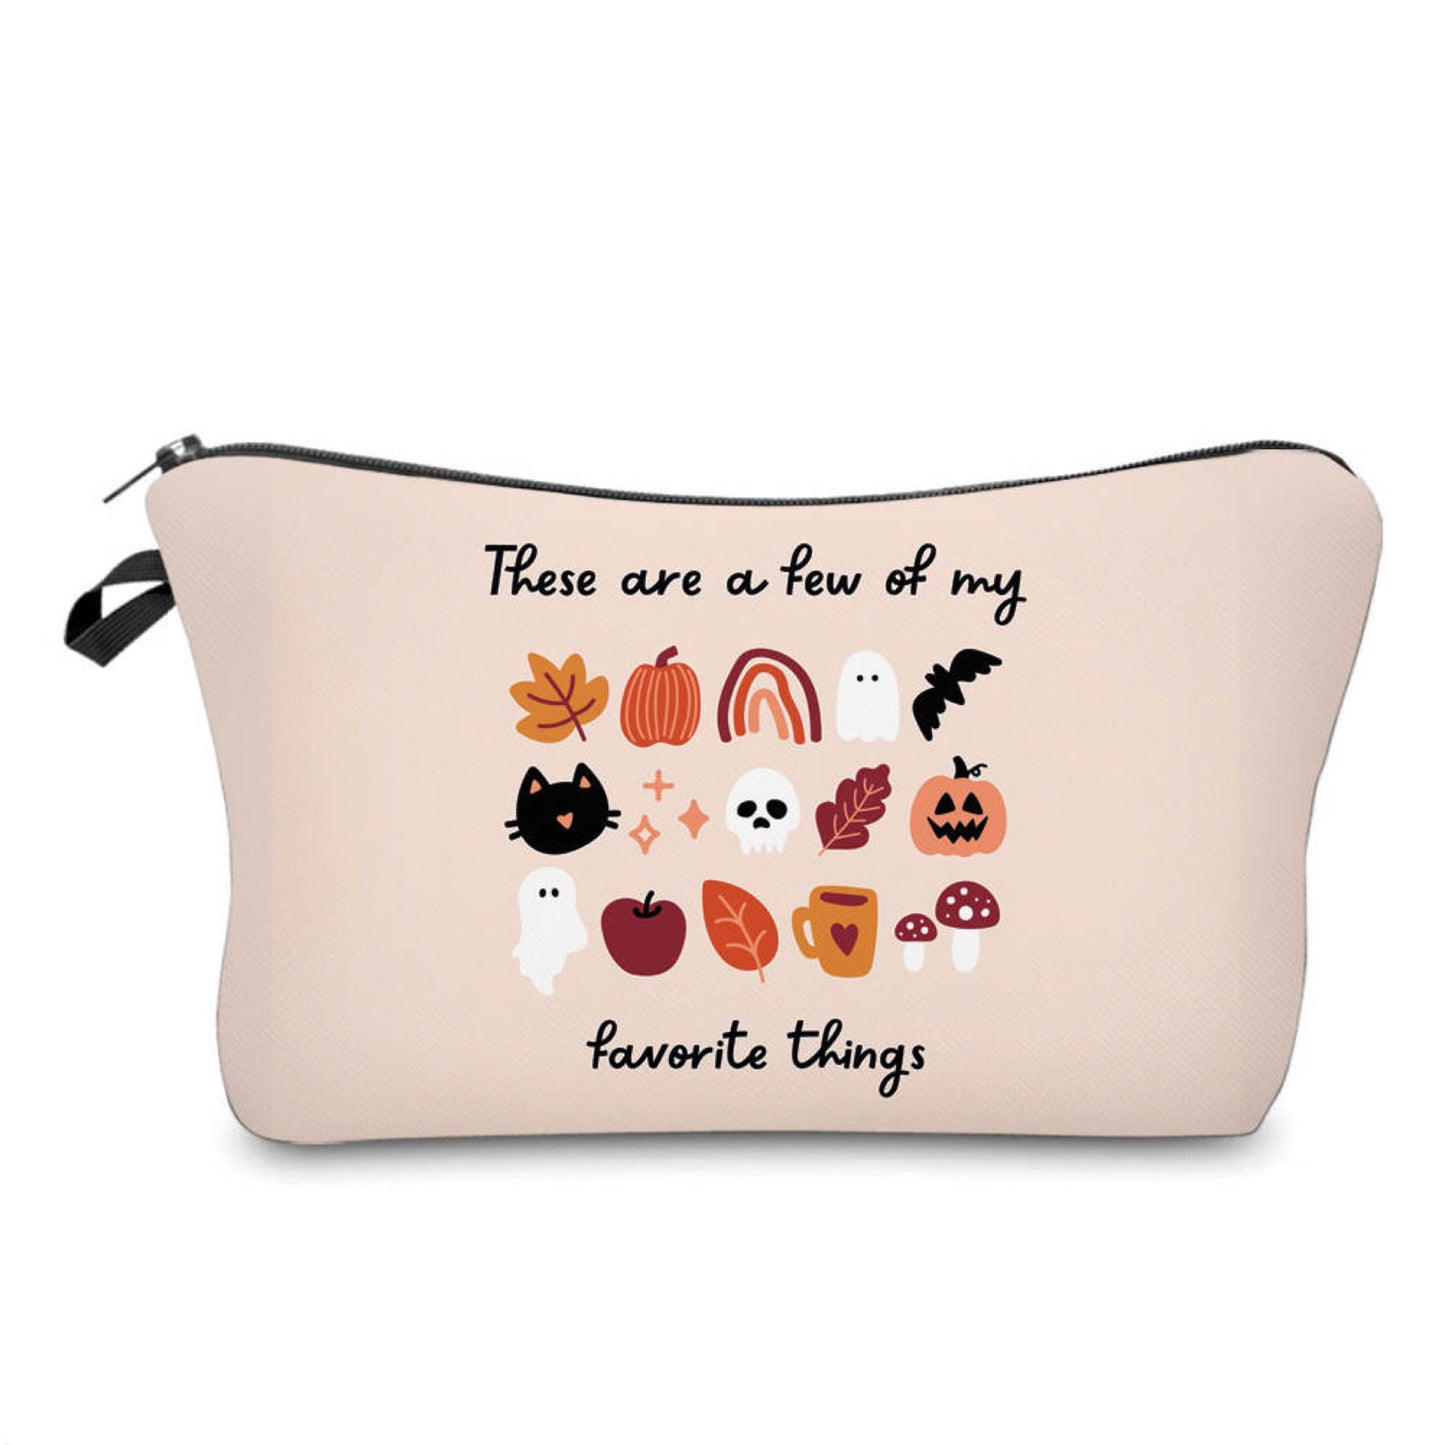 Pouch - Favorite Things